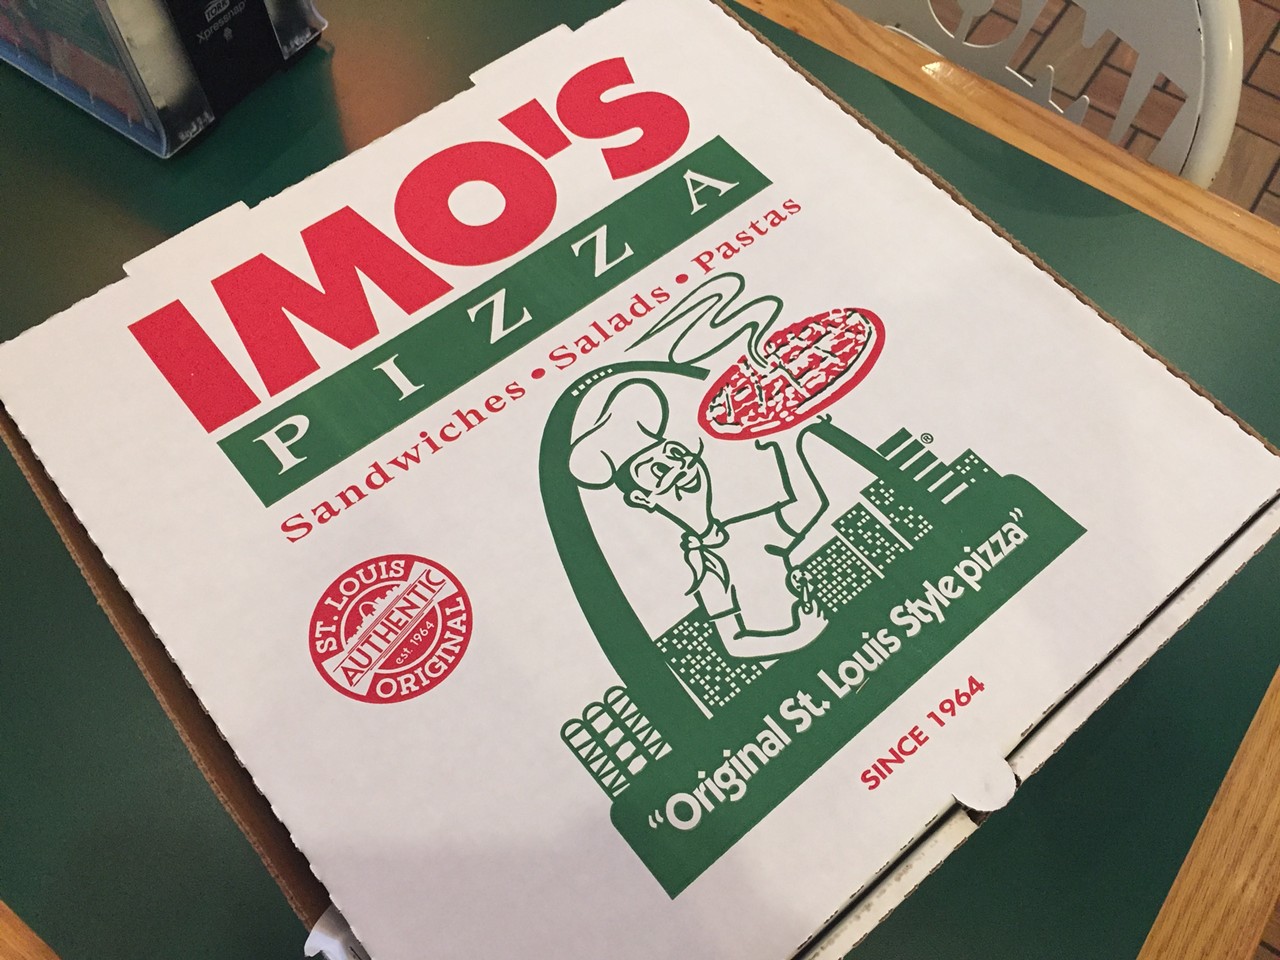 Imo’s
(1000 Hampton Avenue, Imo’s Pizza.com)
If you’re going to continue the tradition and raise an adult who loves Imo’s Pizza, you have to start them when they’re kids.